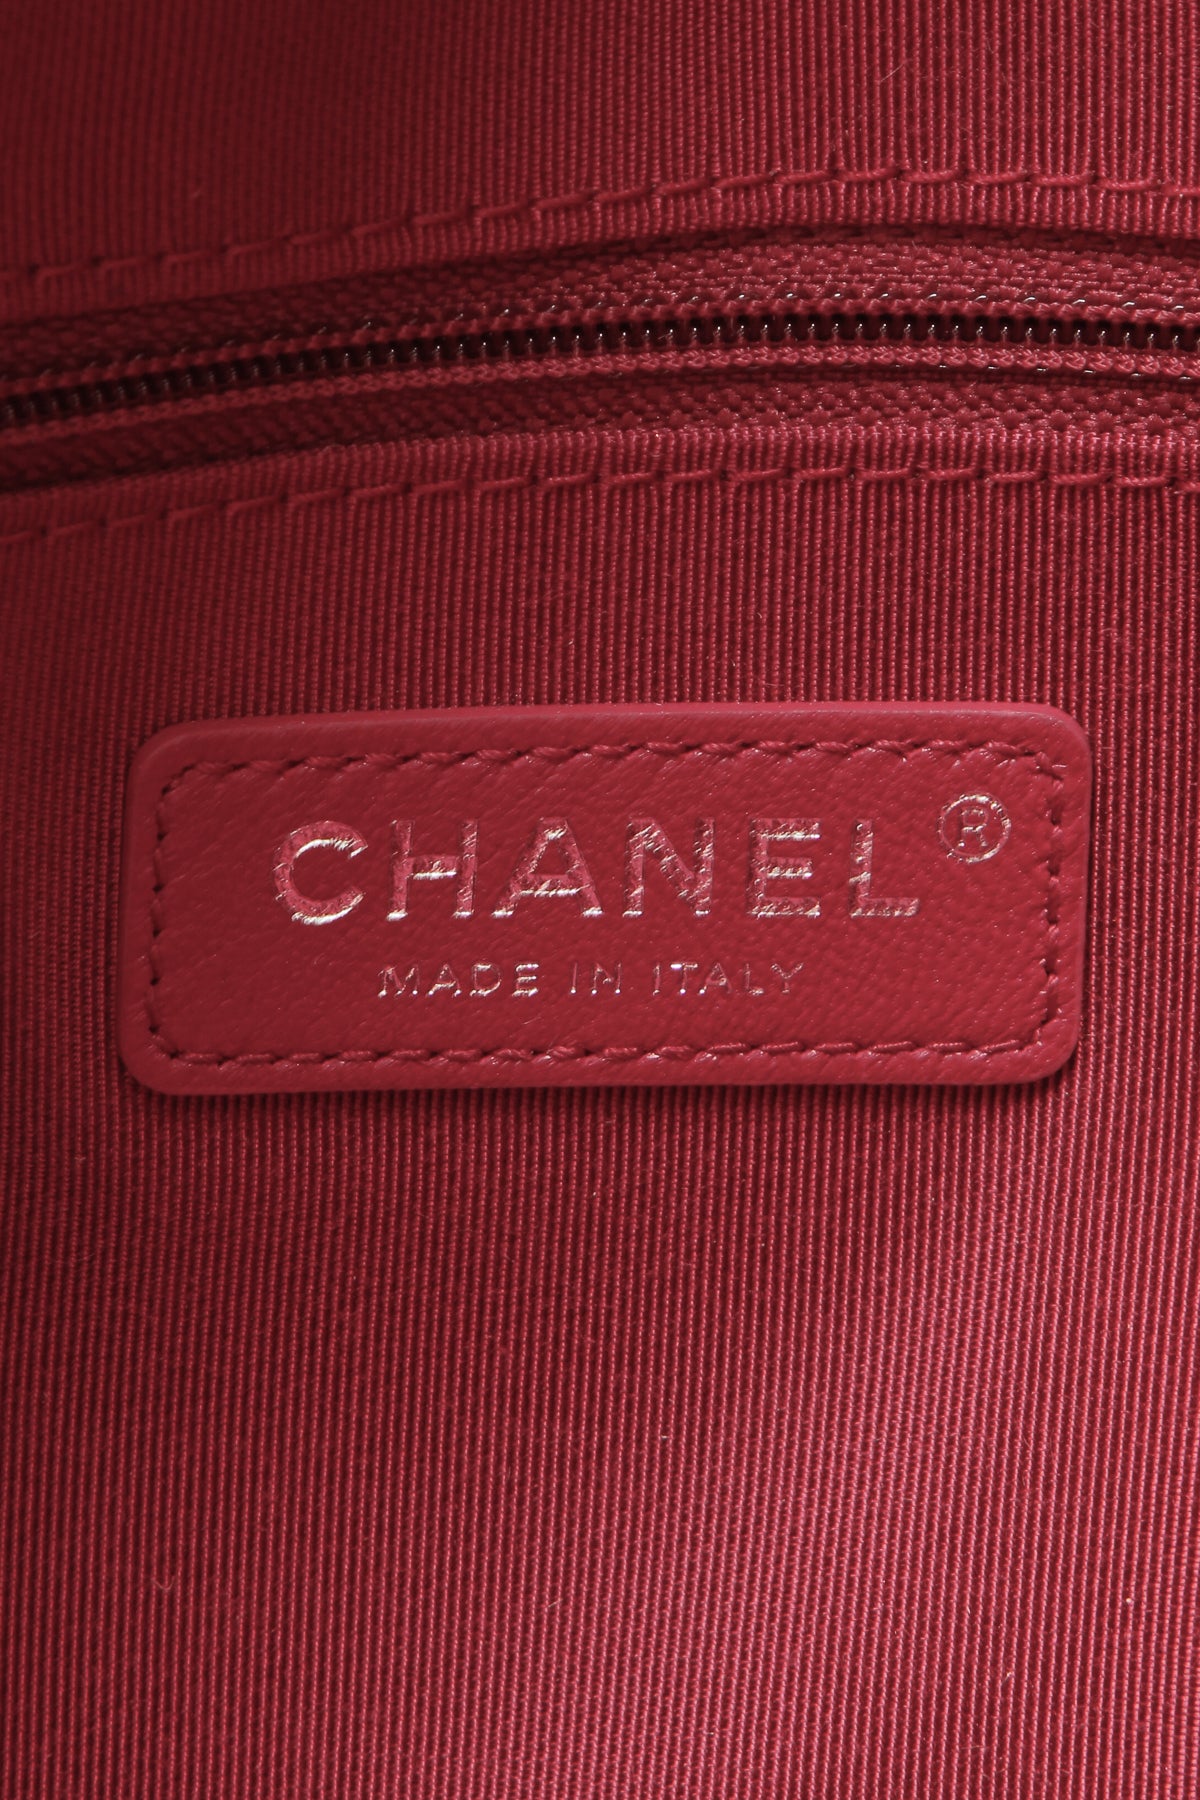 CHANEL 2022 SS Chanel's Gabrielle Large Hobo Bag (A93824 Y61477 94305)